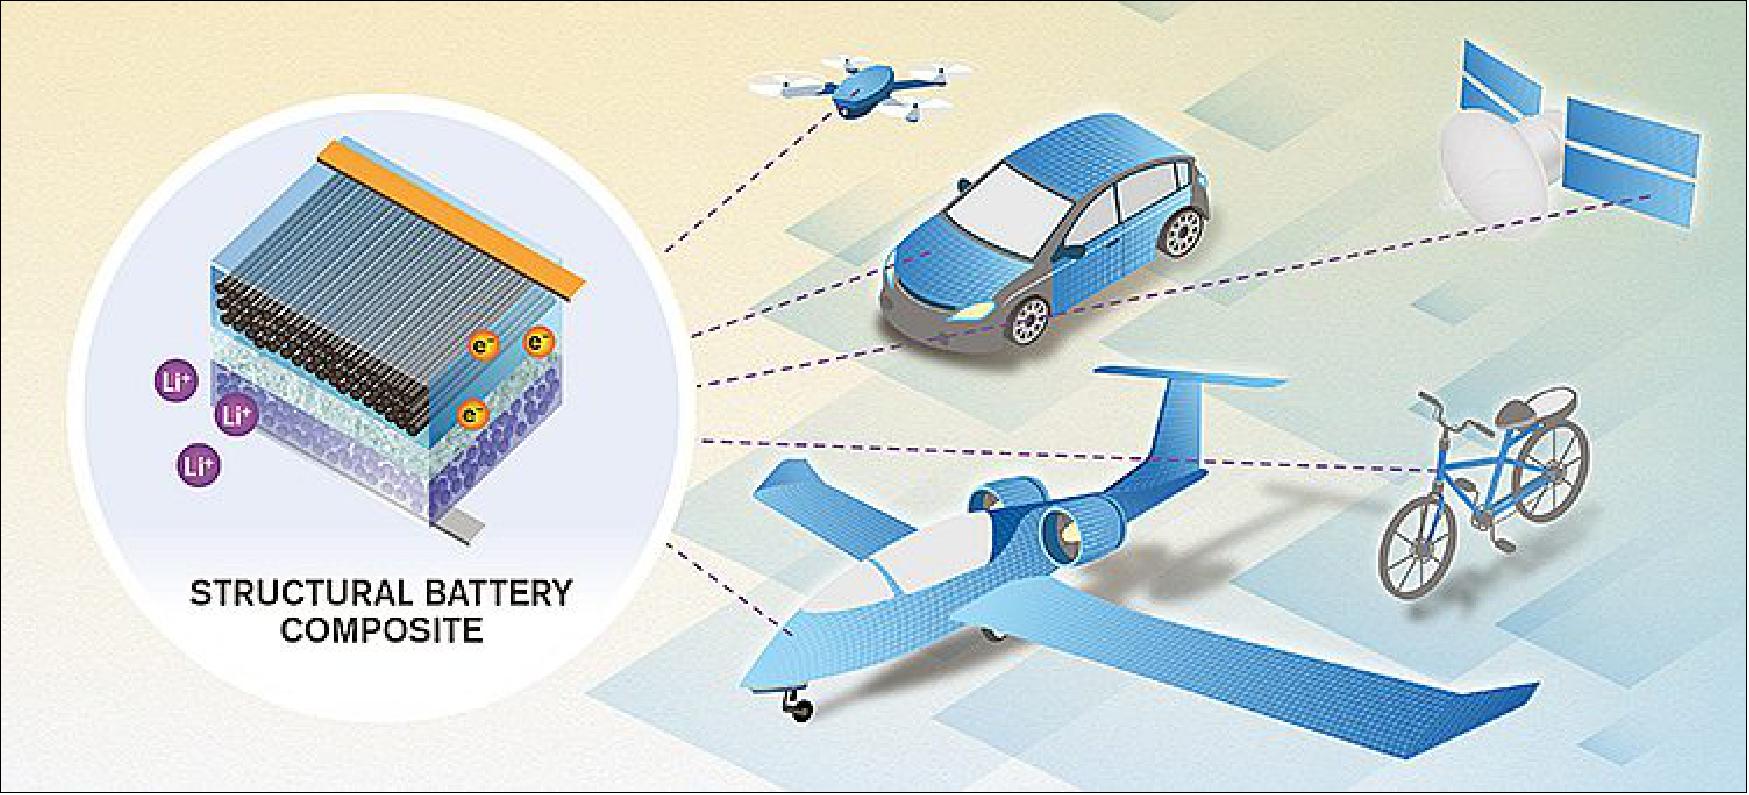 Figure 19: Structural battery composites cannot store as much energy as lithium-ion batteries, but have several characteristics that make them highly attractive for use in vehicles and other applications. When the battery becomes part of the load bearing structure, the mass of the battery essentially ‘disappears’ (illustration: Yen Strandqvist)